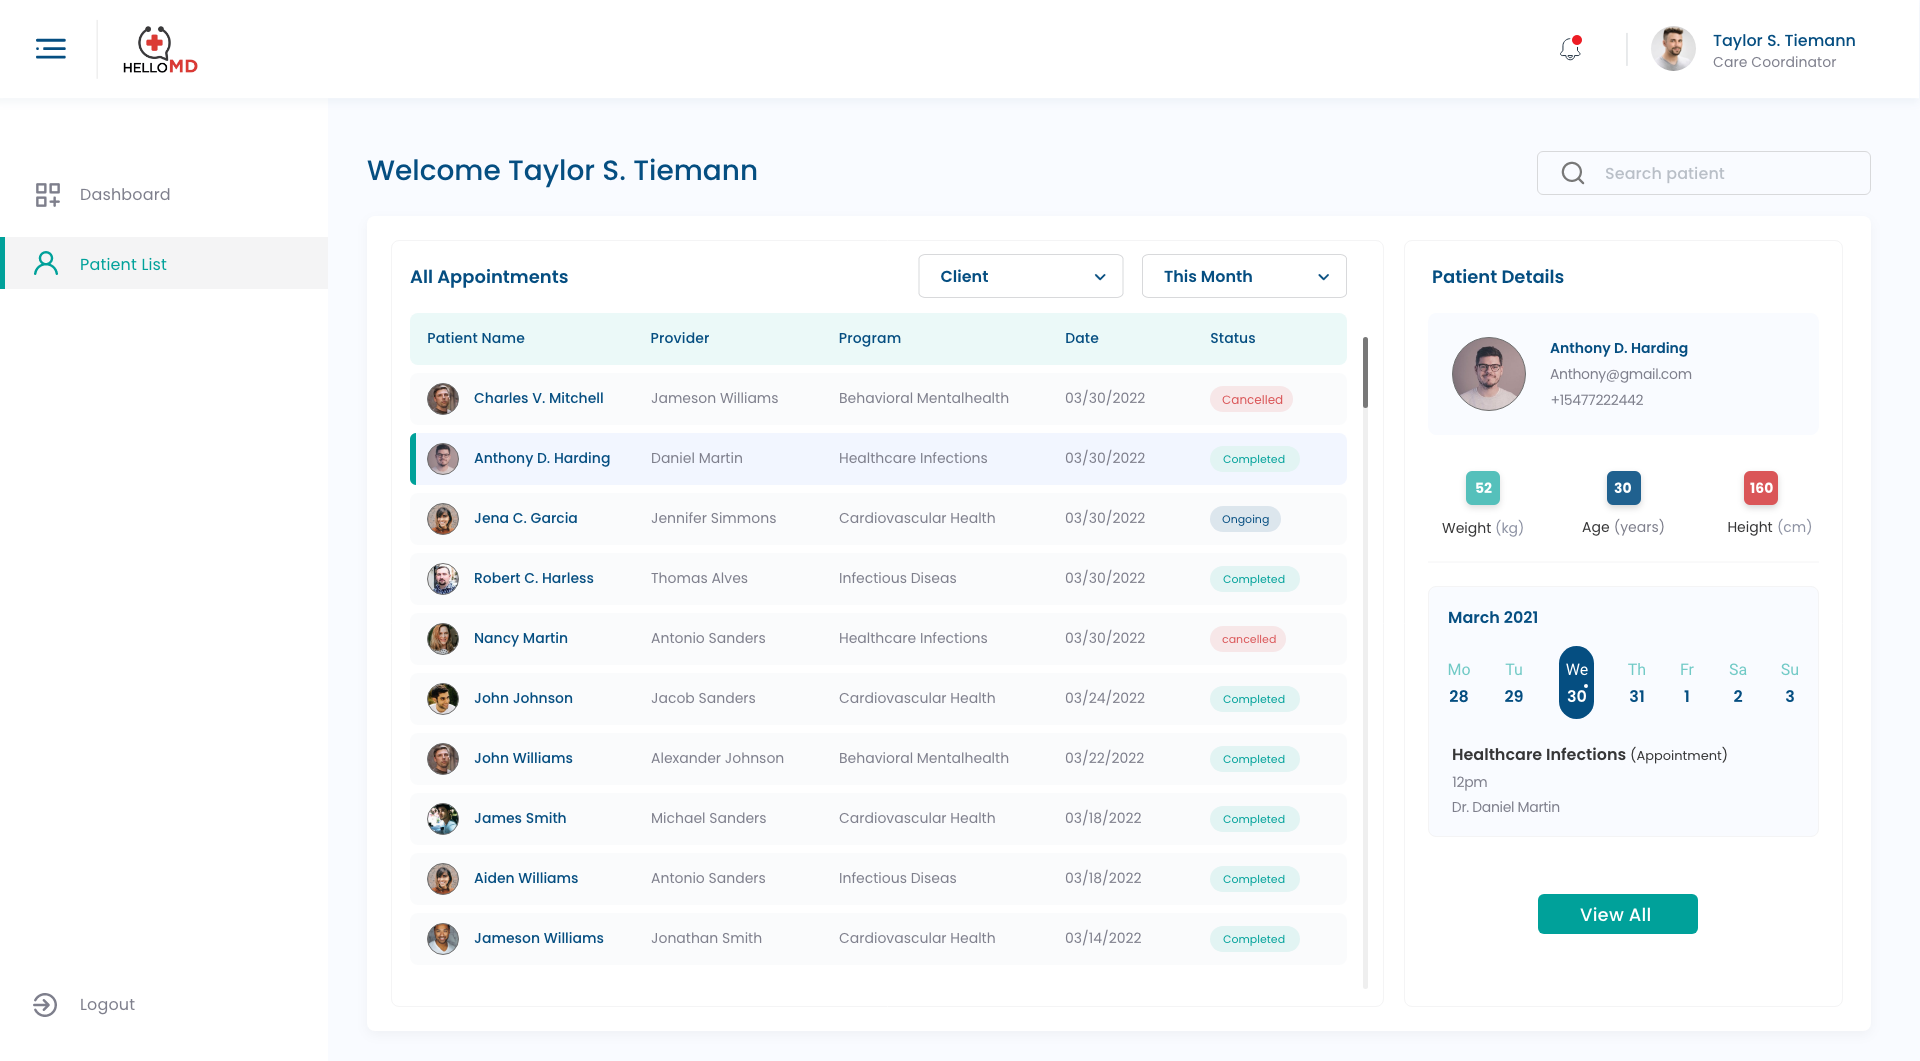 Complete view of patient list, overview of individual details, and current patient appointment status.